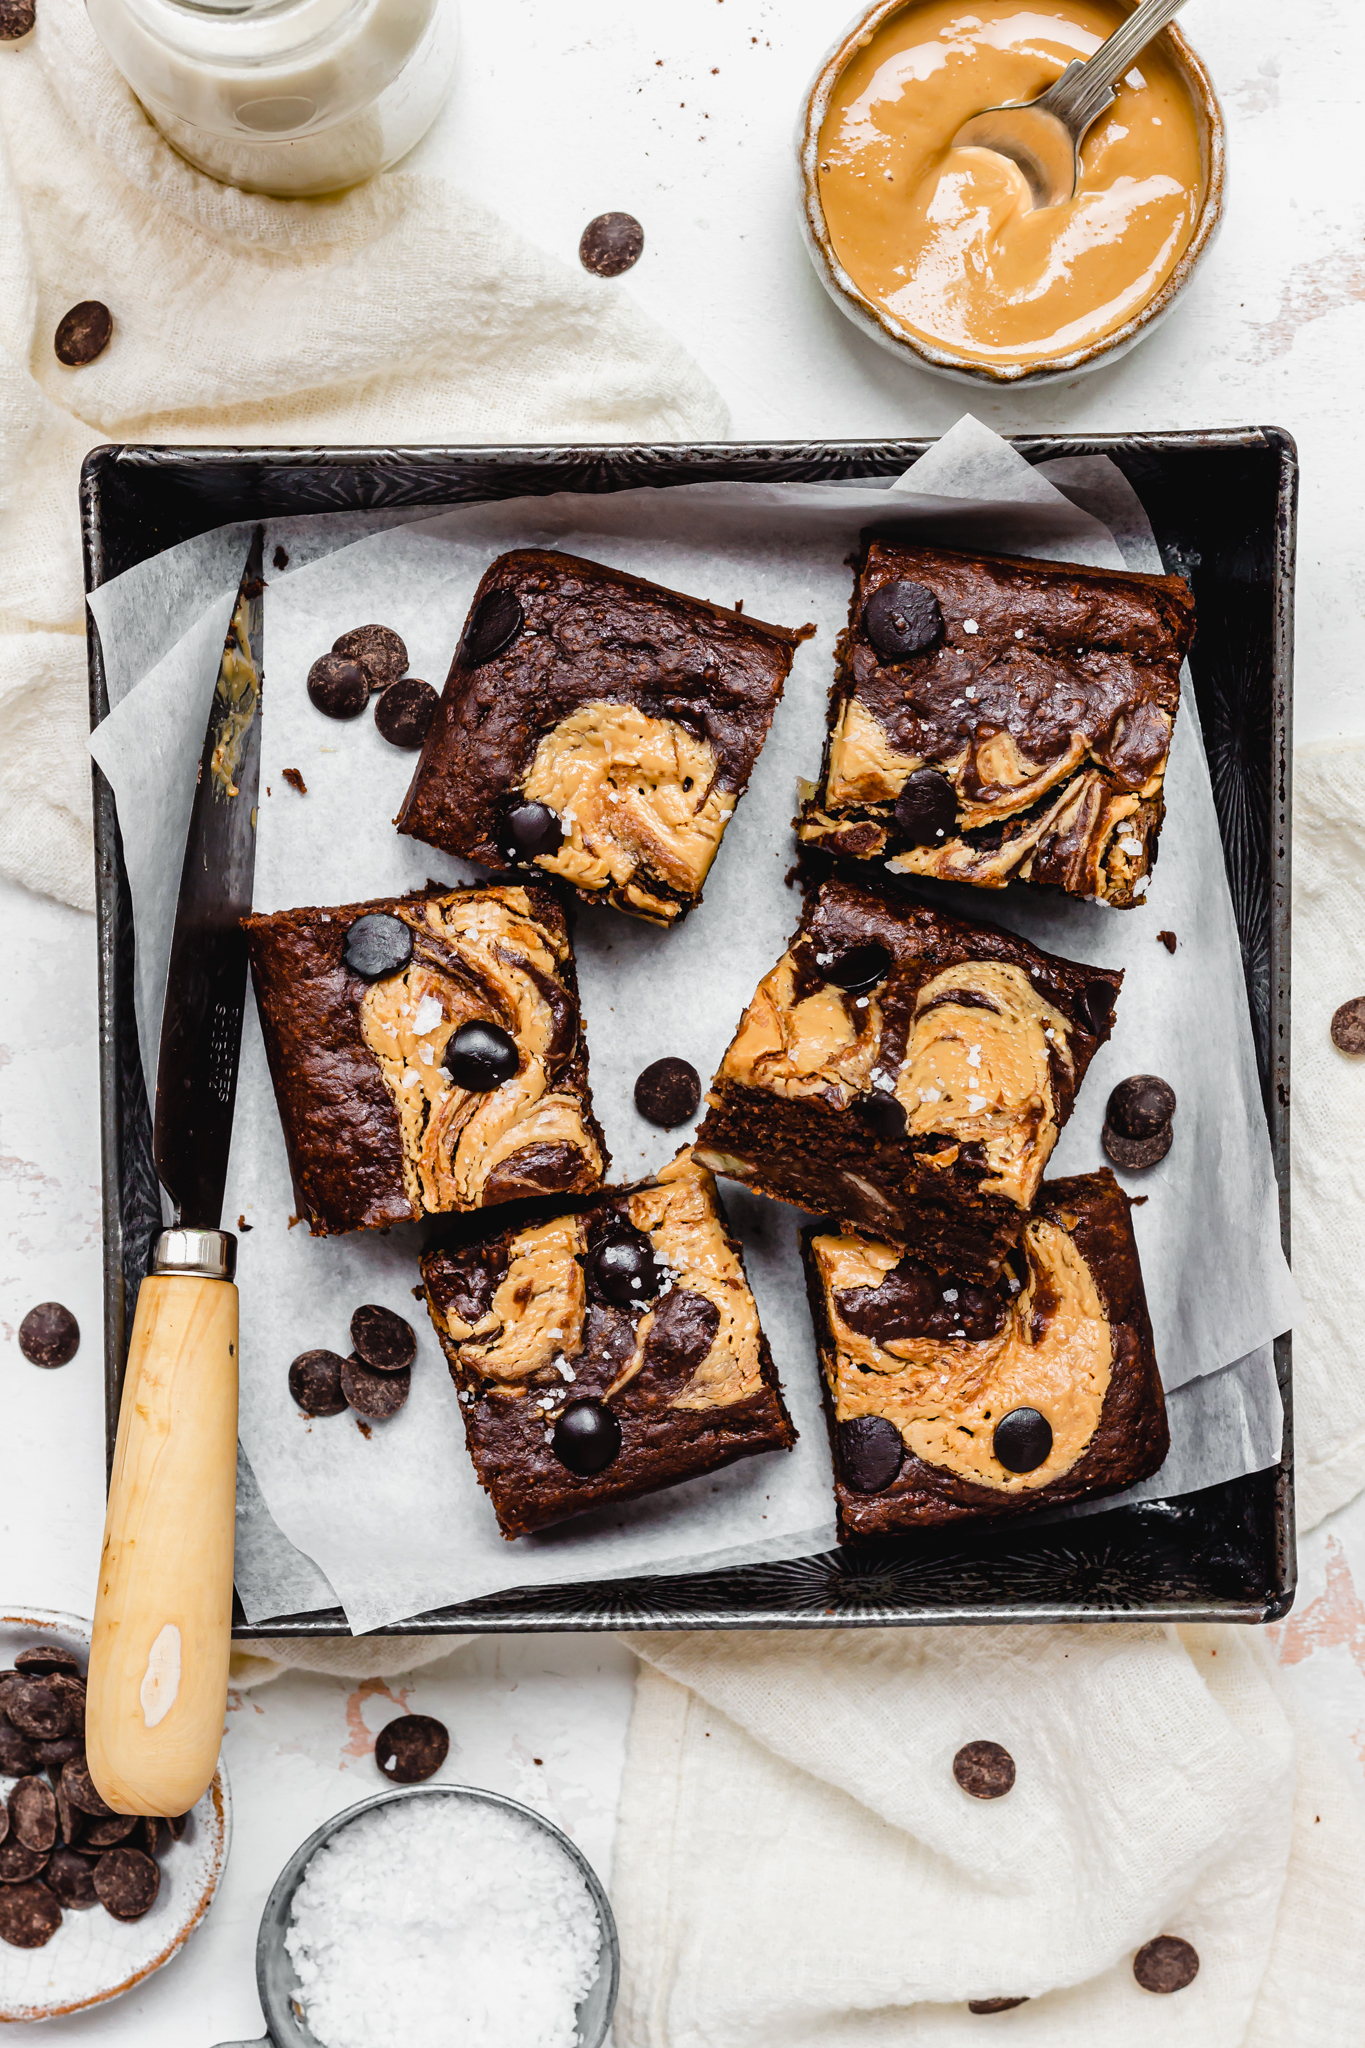 Chocolate Banana Bread Peanut Butter Brownies in a metal tray